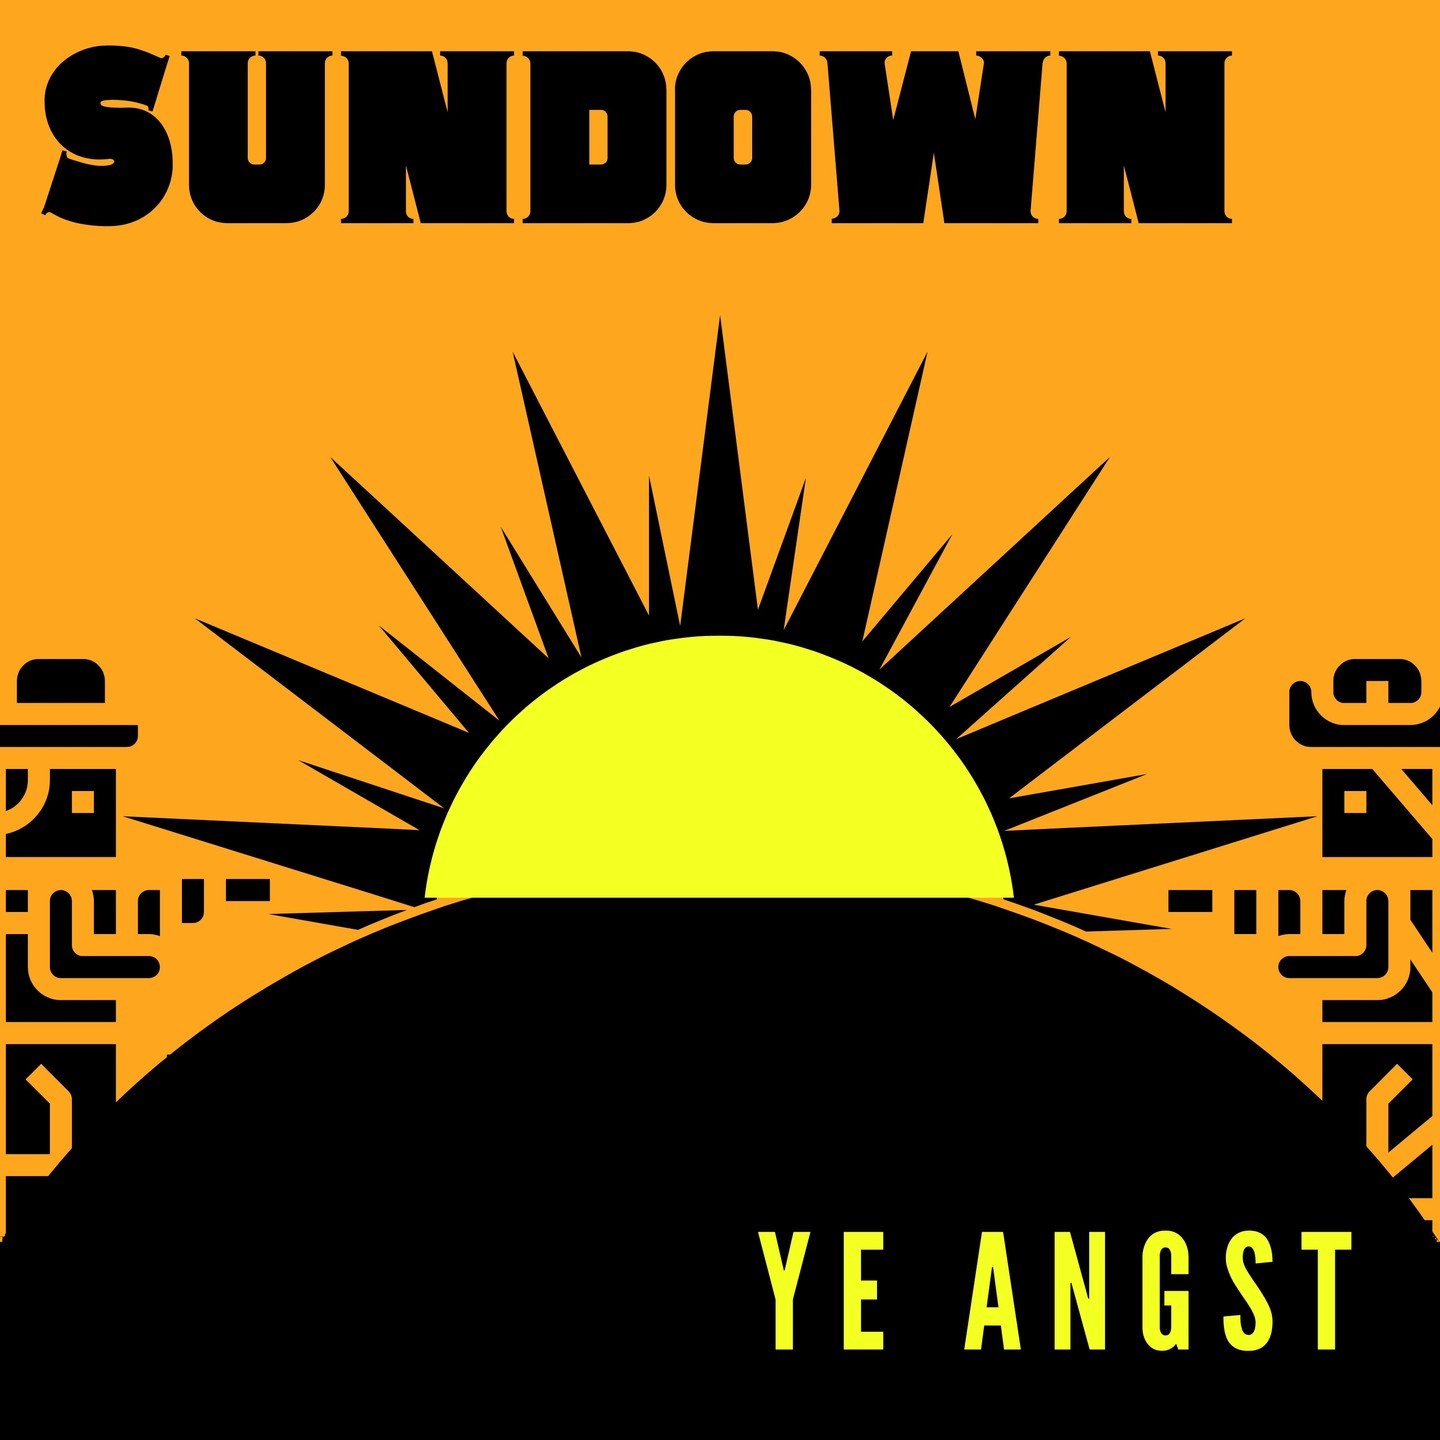 Sundown by Ye Angst: Review